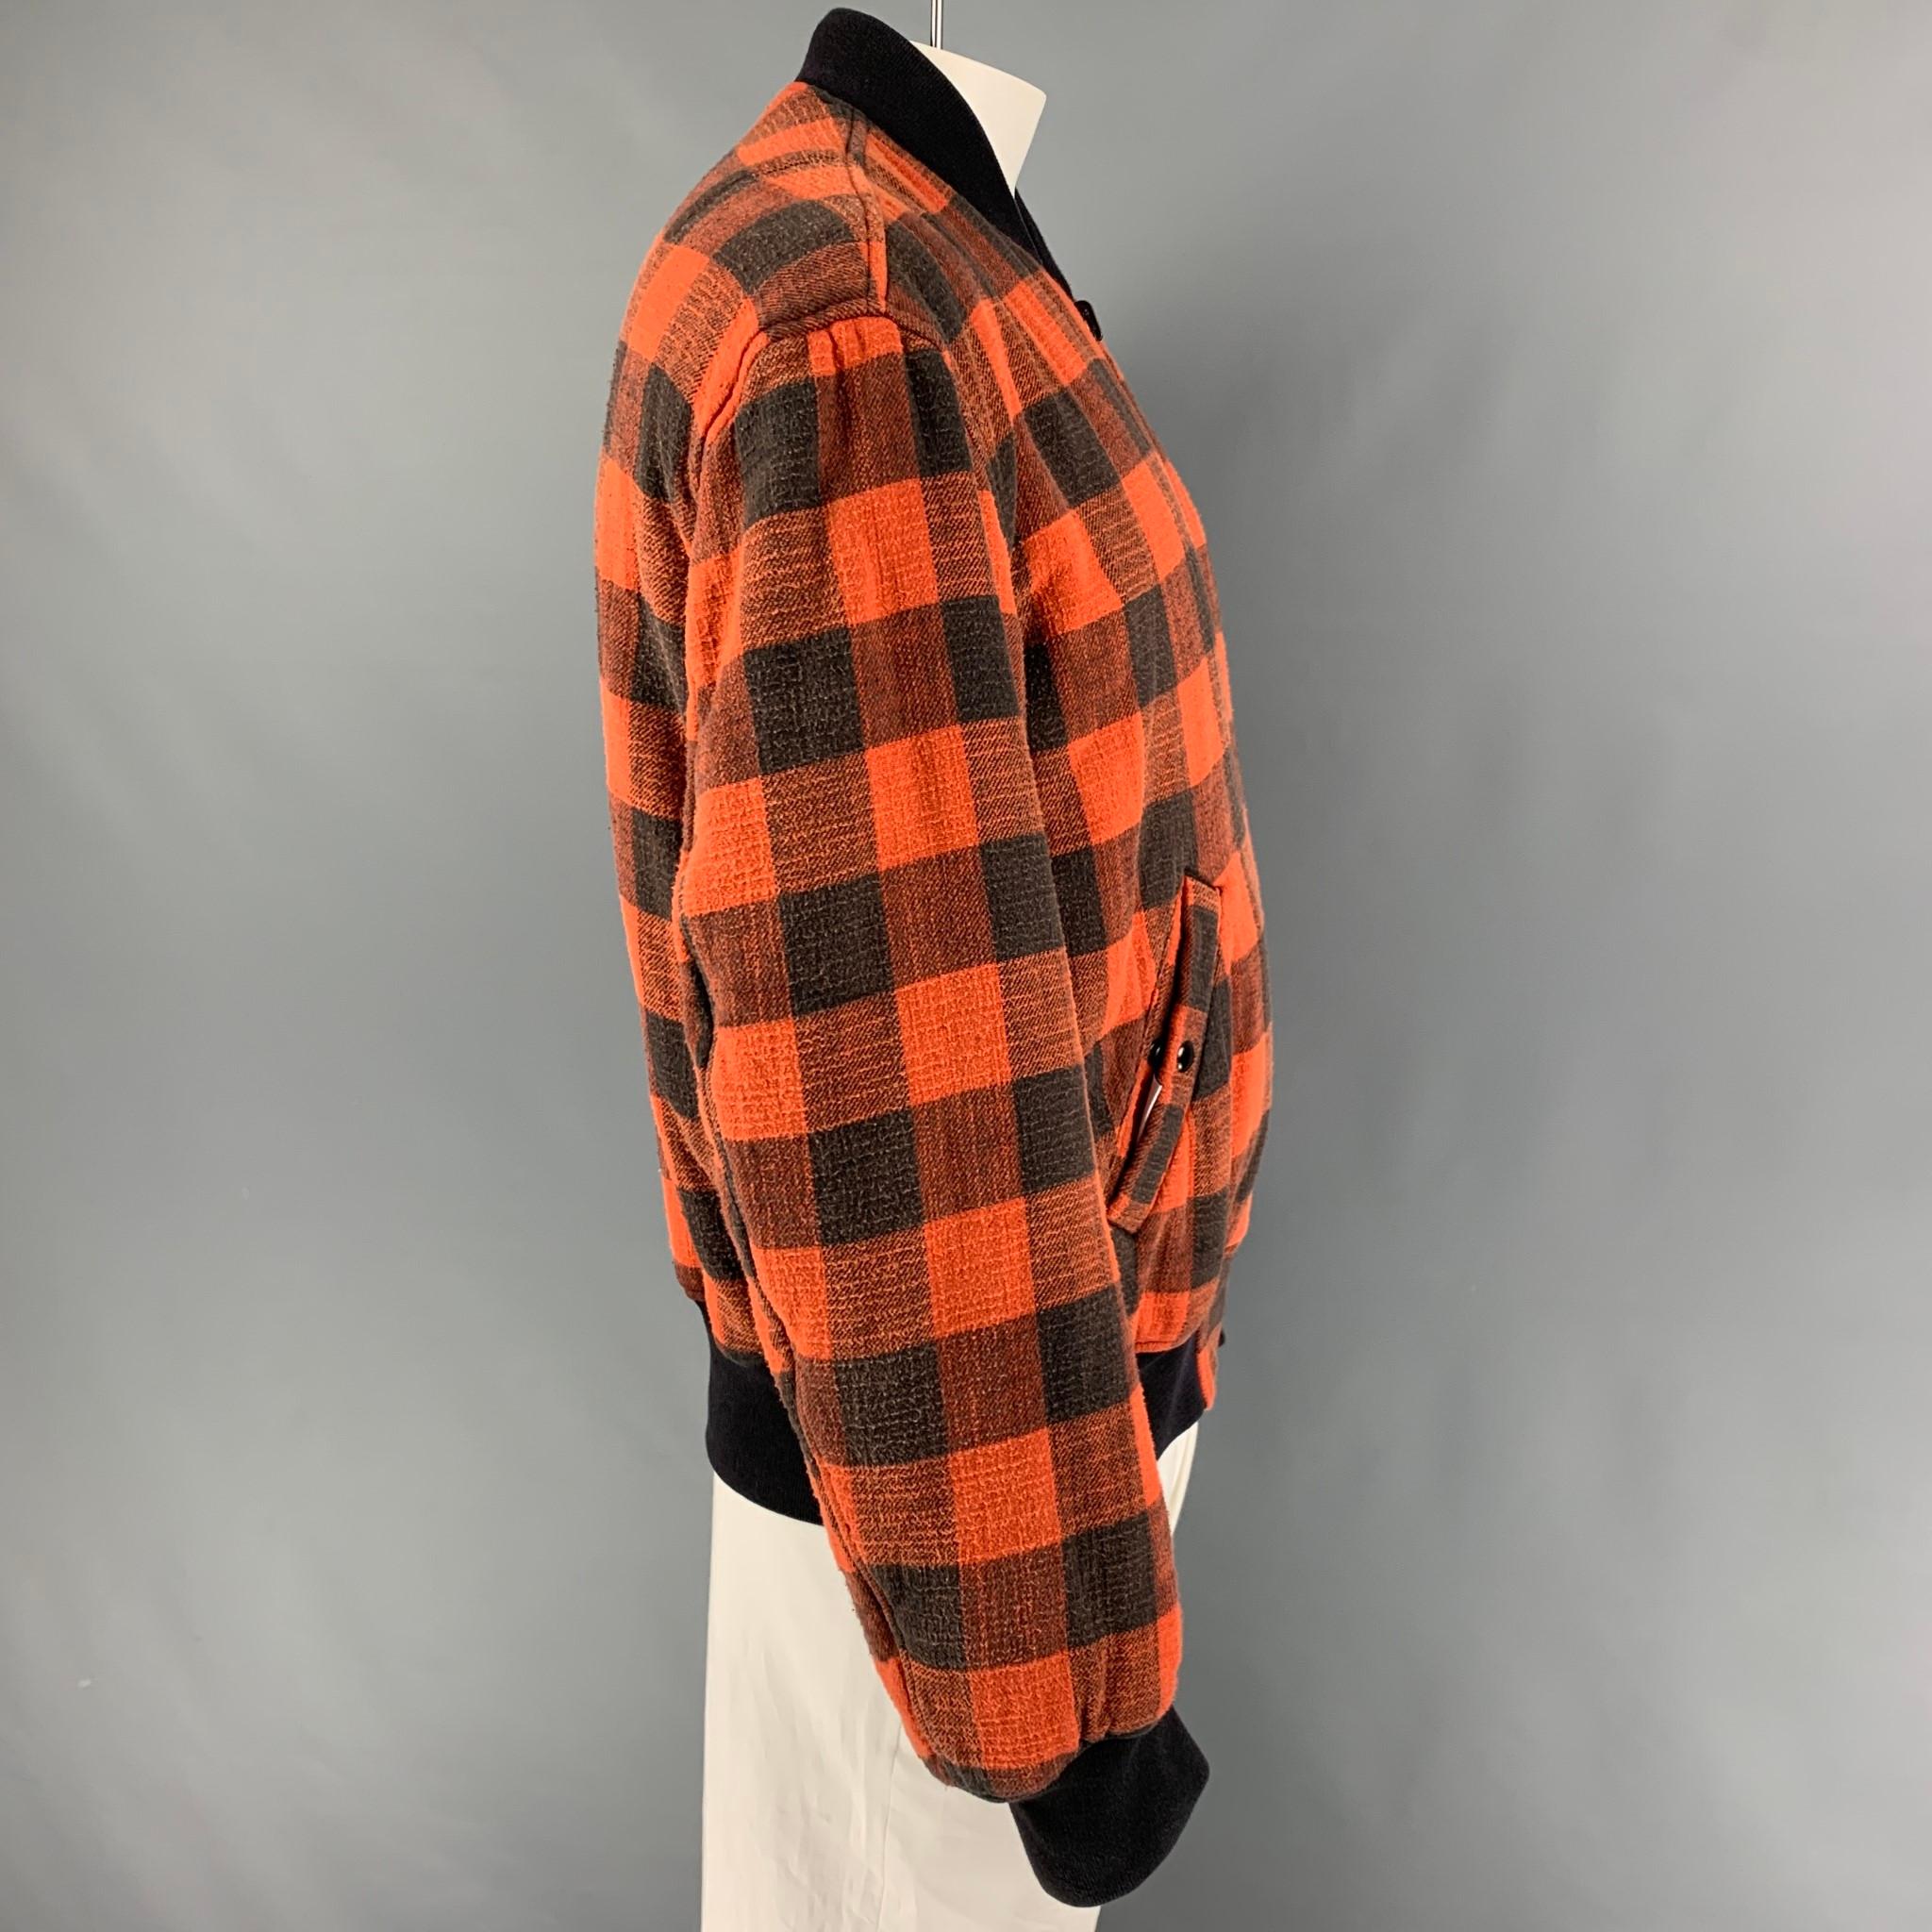 R13 jacket comes in a orange & black plaid cotton featuring a reversible style, oversized, bomber, ribbed hem, front pockets, and a full zip up closure.

Very Good Pre-Owned Condition.
Marked: XS

Measurements:

Shoulder: 22.5 in.
Chest: 46